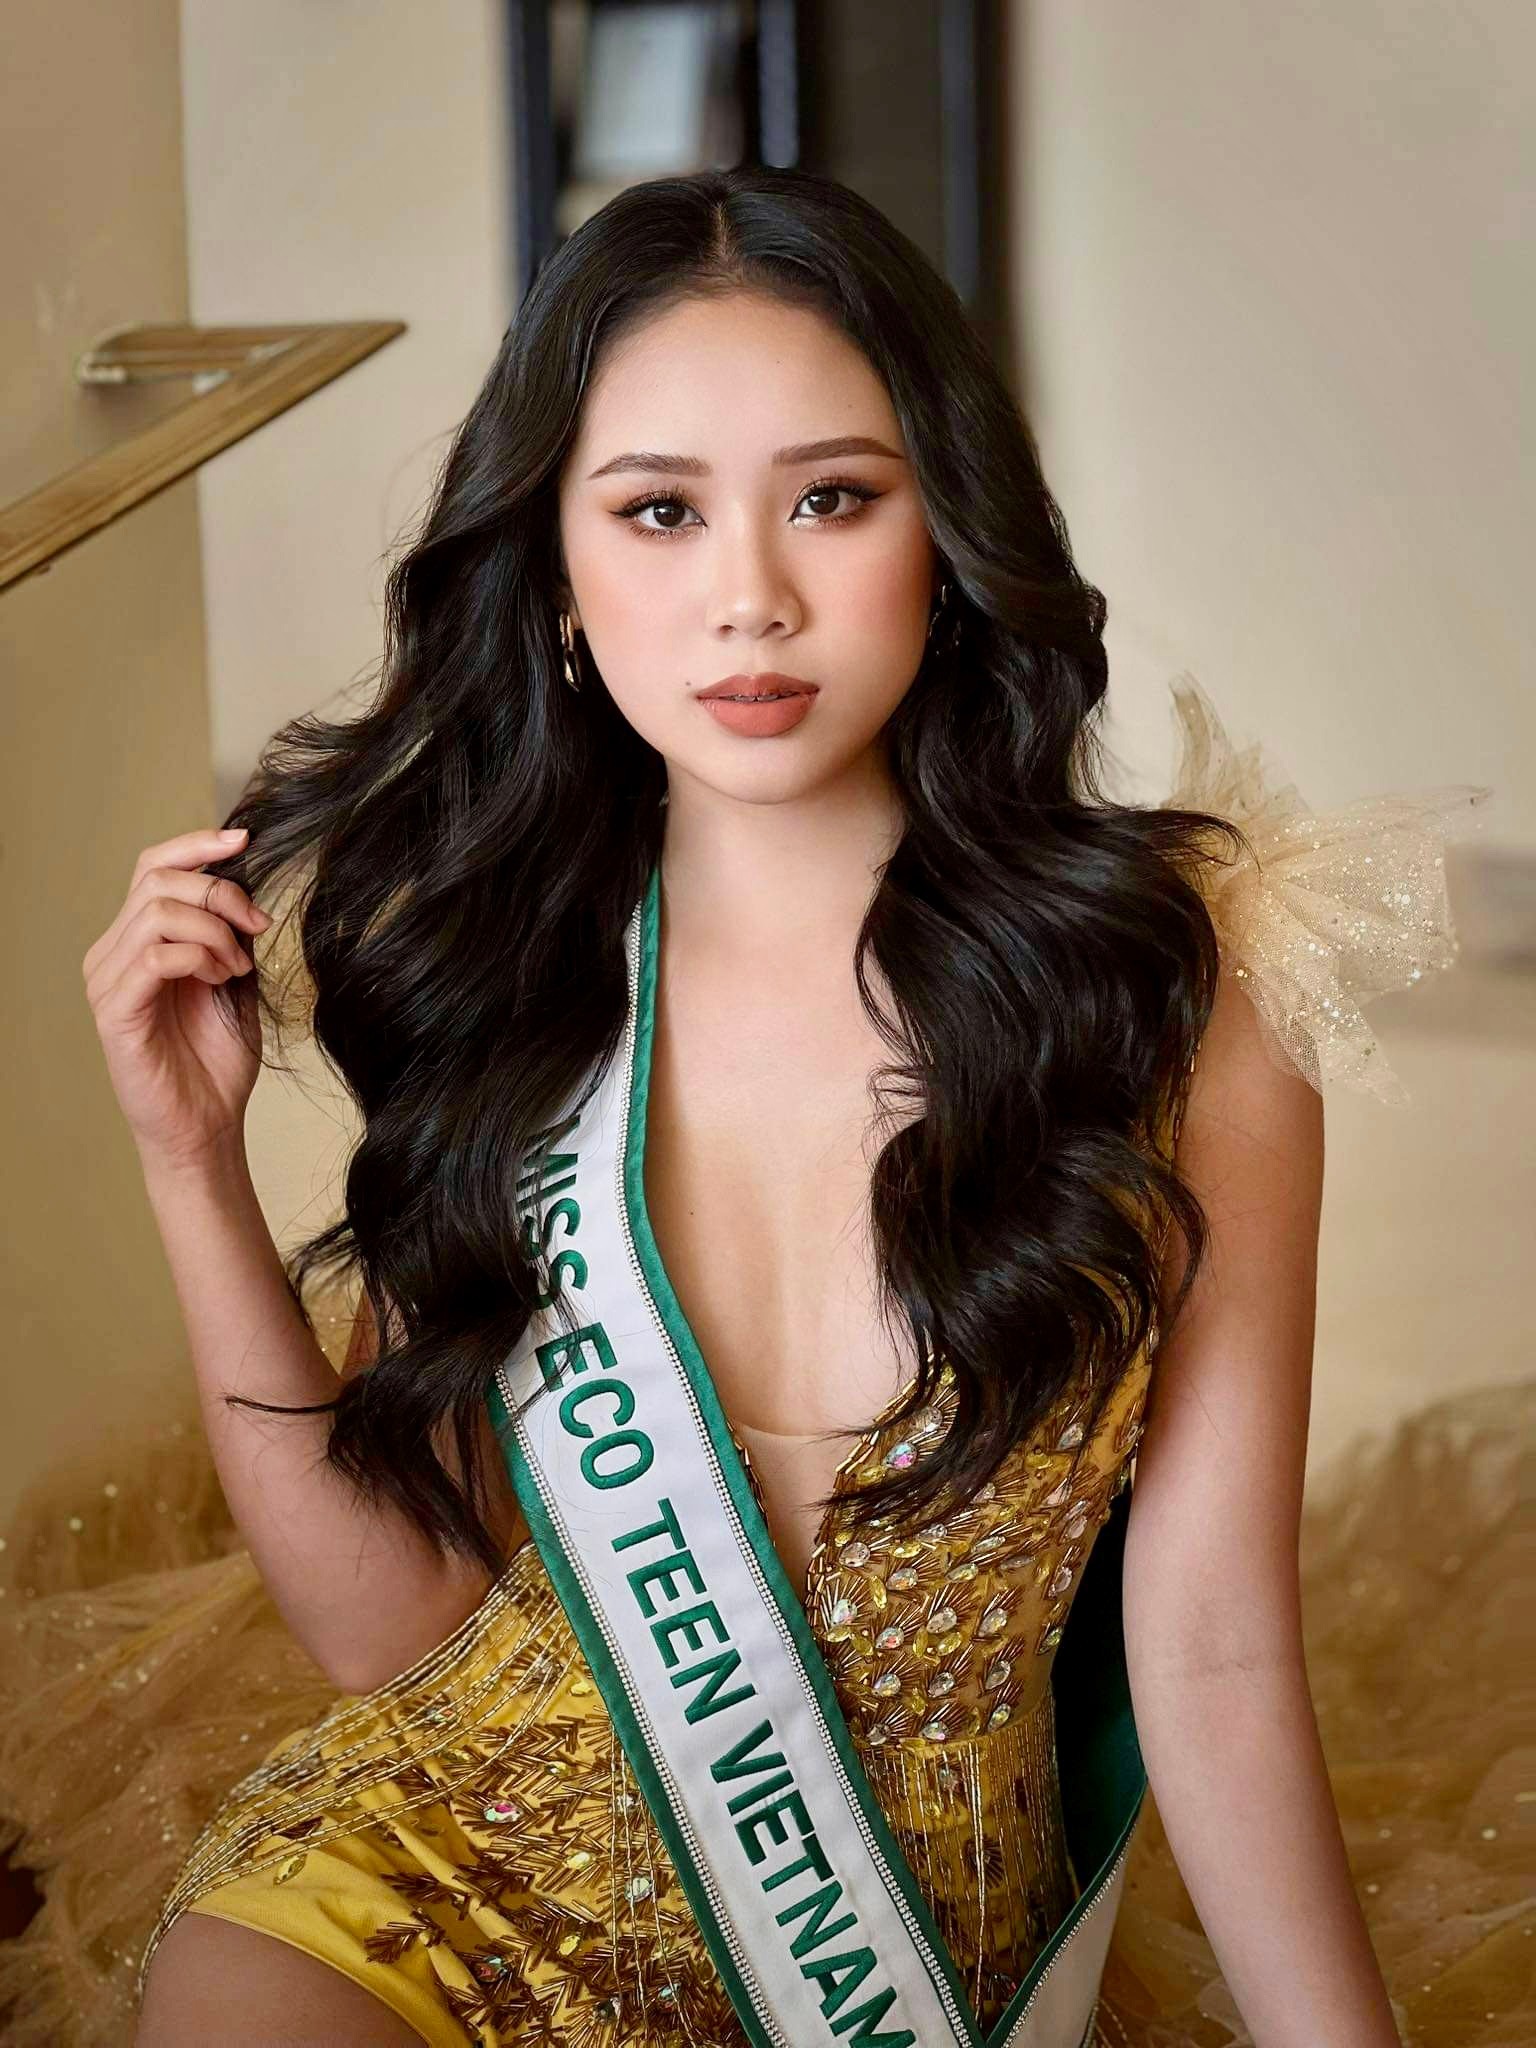 Vietnam's 14-year-old female student representative was crowned Miss Eco Teen runner-up in Egypt - Photo 7.